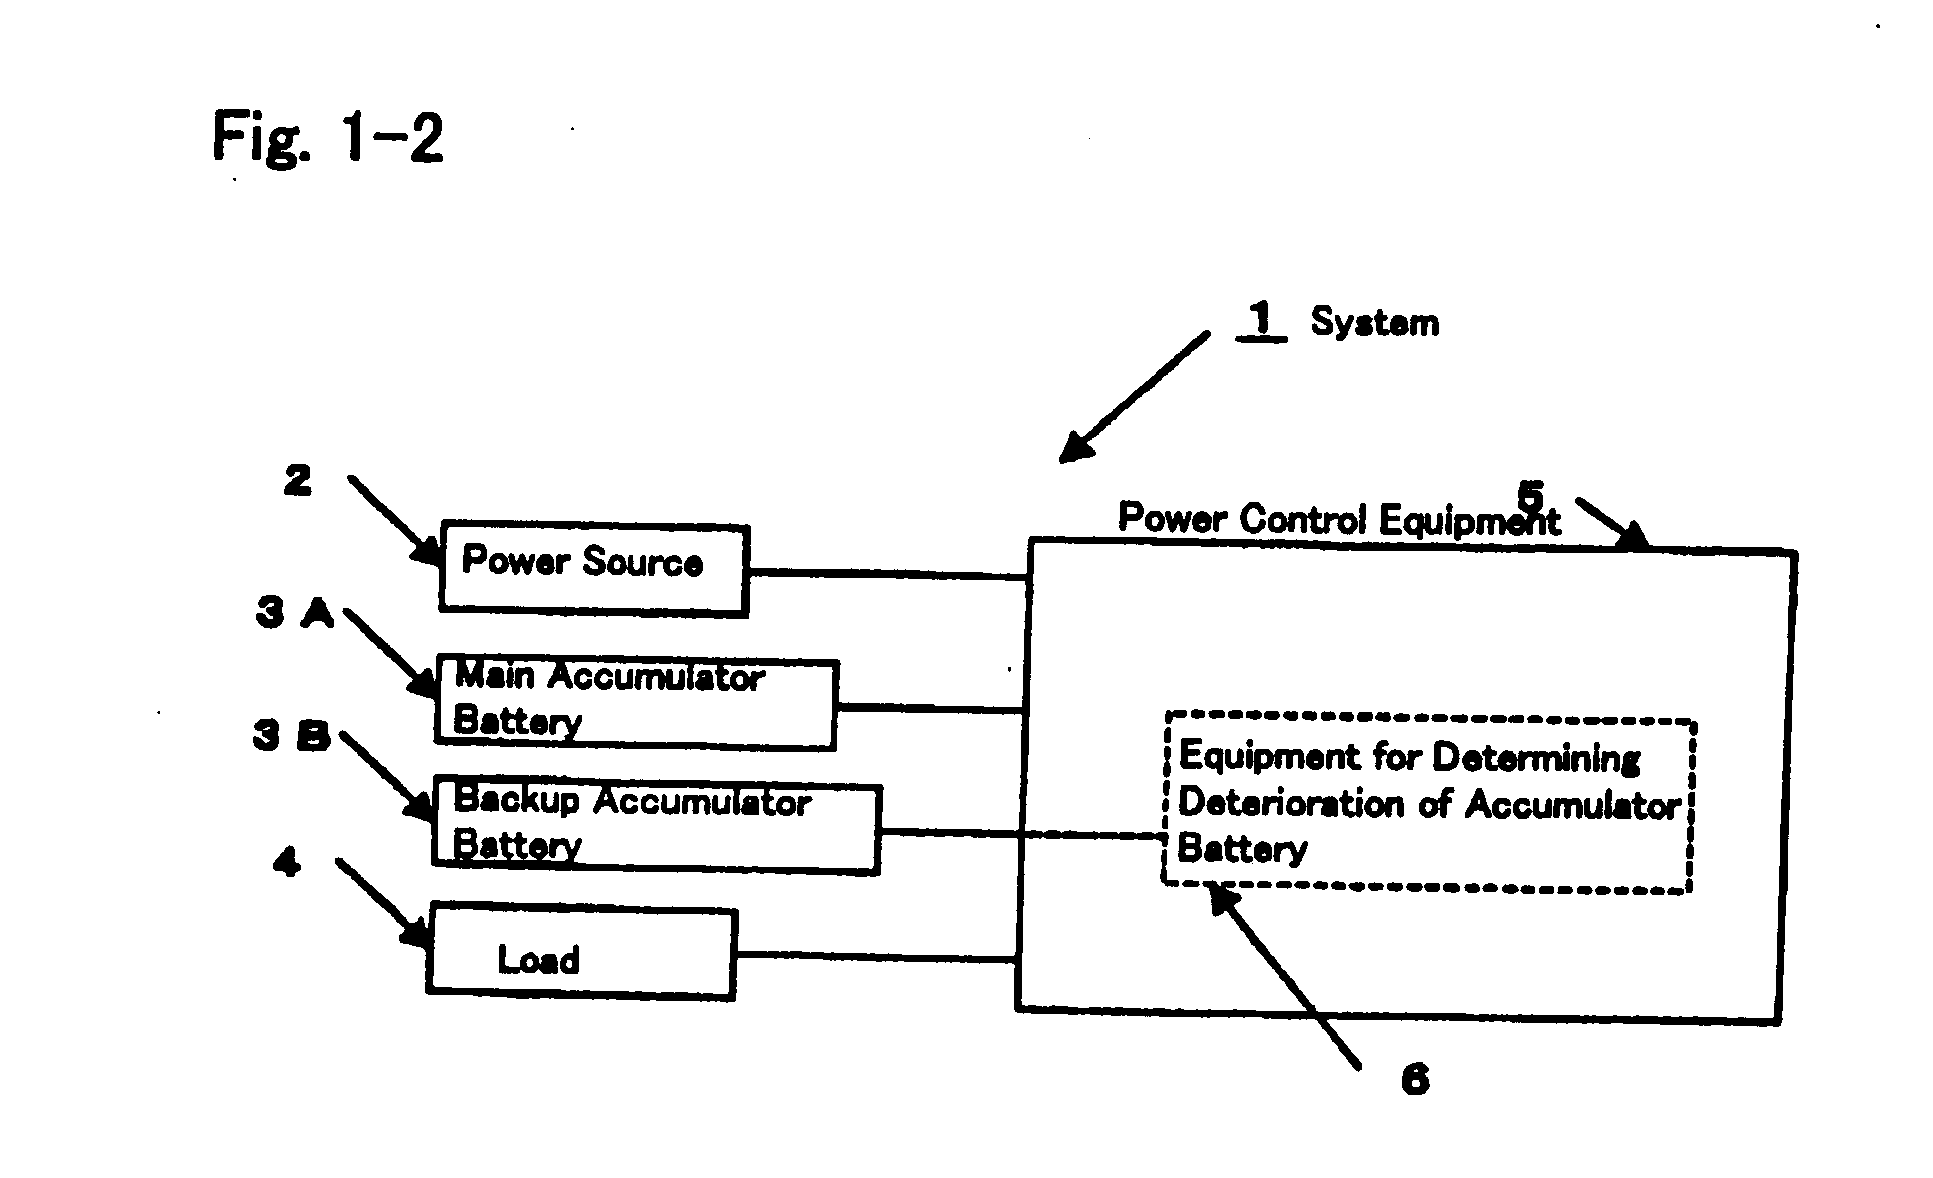 Method for determining deterioration of accumulator battery, method for measuring internal impedance of secondary battery, equipment for measuring internal impedance of secondary battery, equipment for determining deterioration of secondary battery, and power supply system